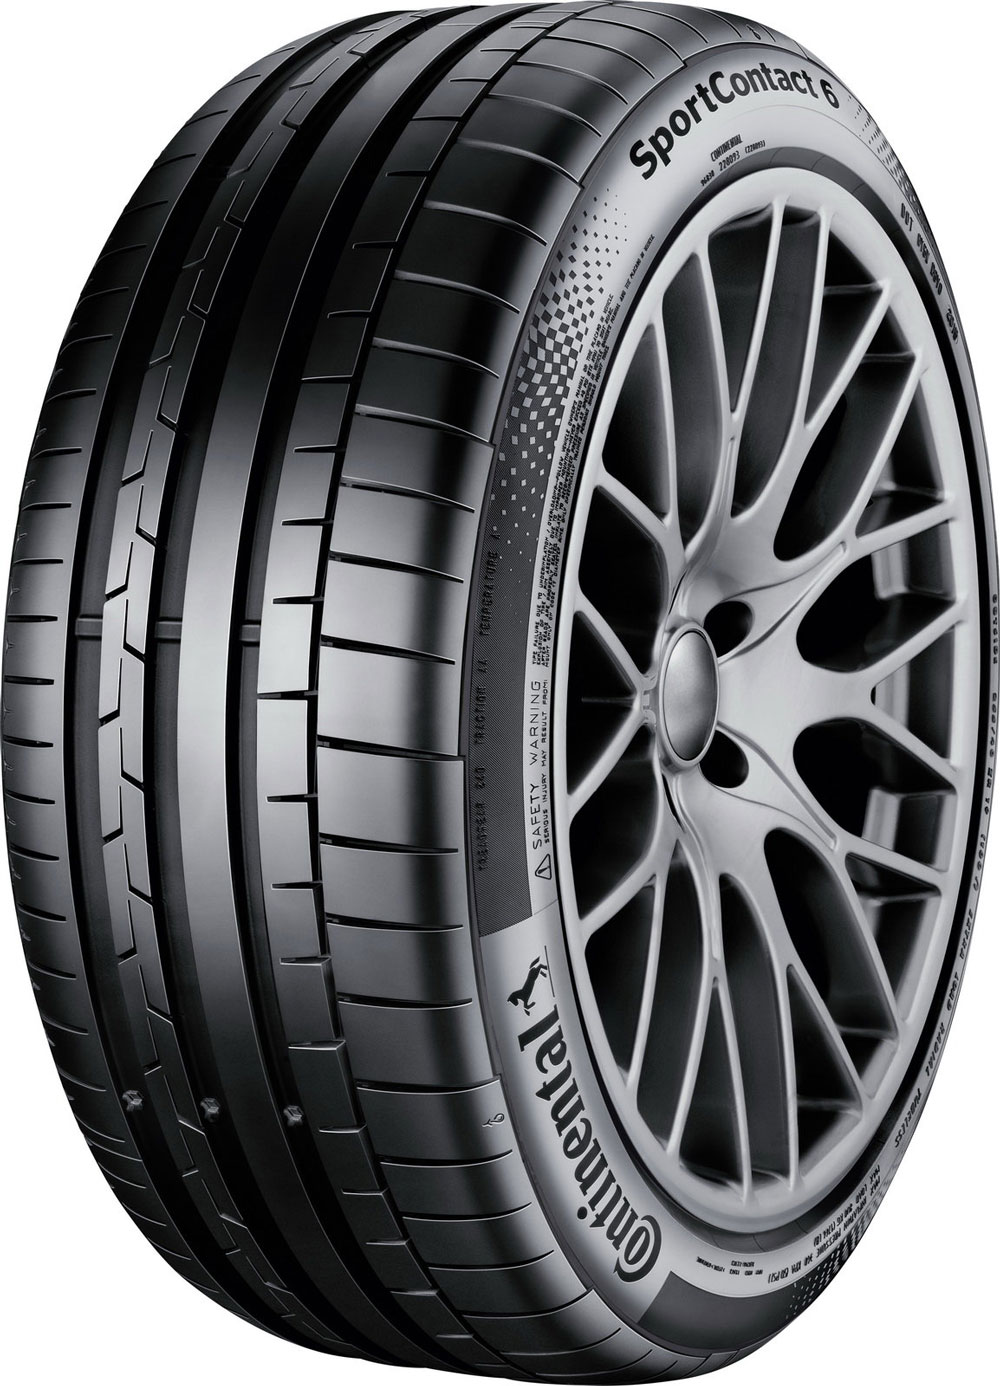 CONTINENTAL SPORT CONTACT 6 XL FP 295/35 R22 108Y